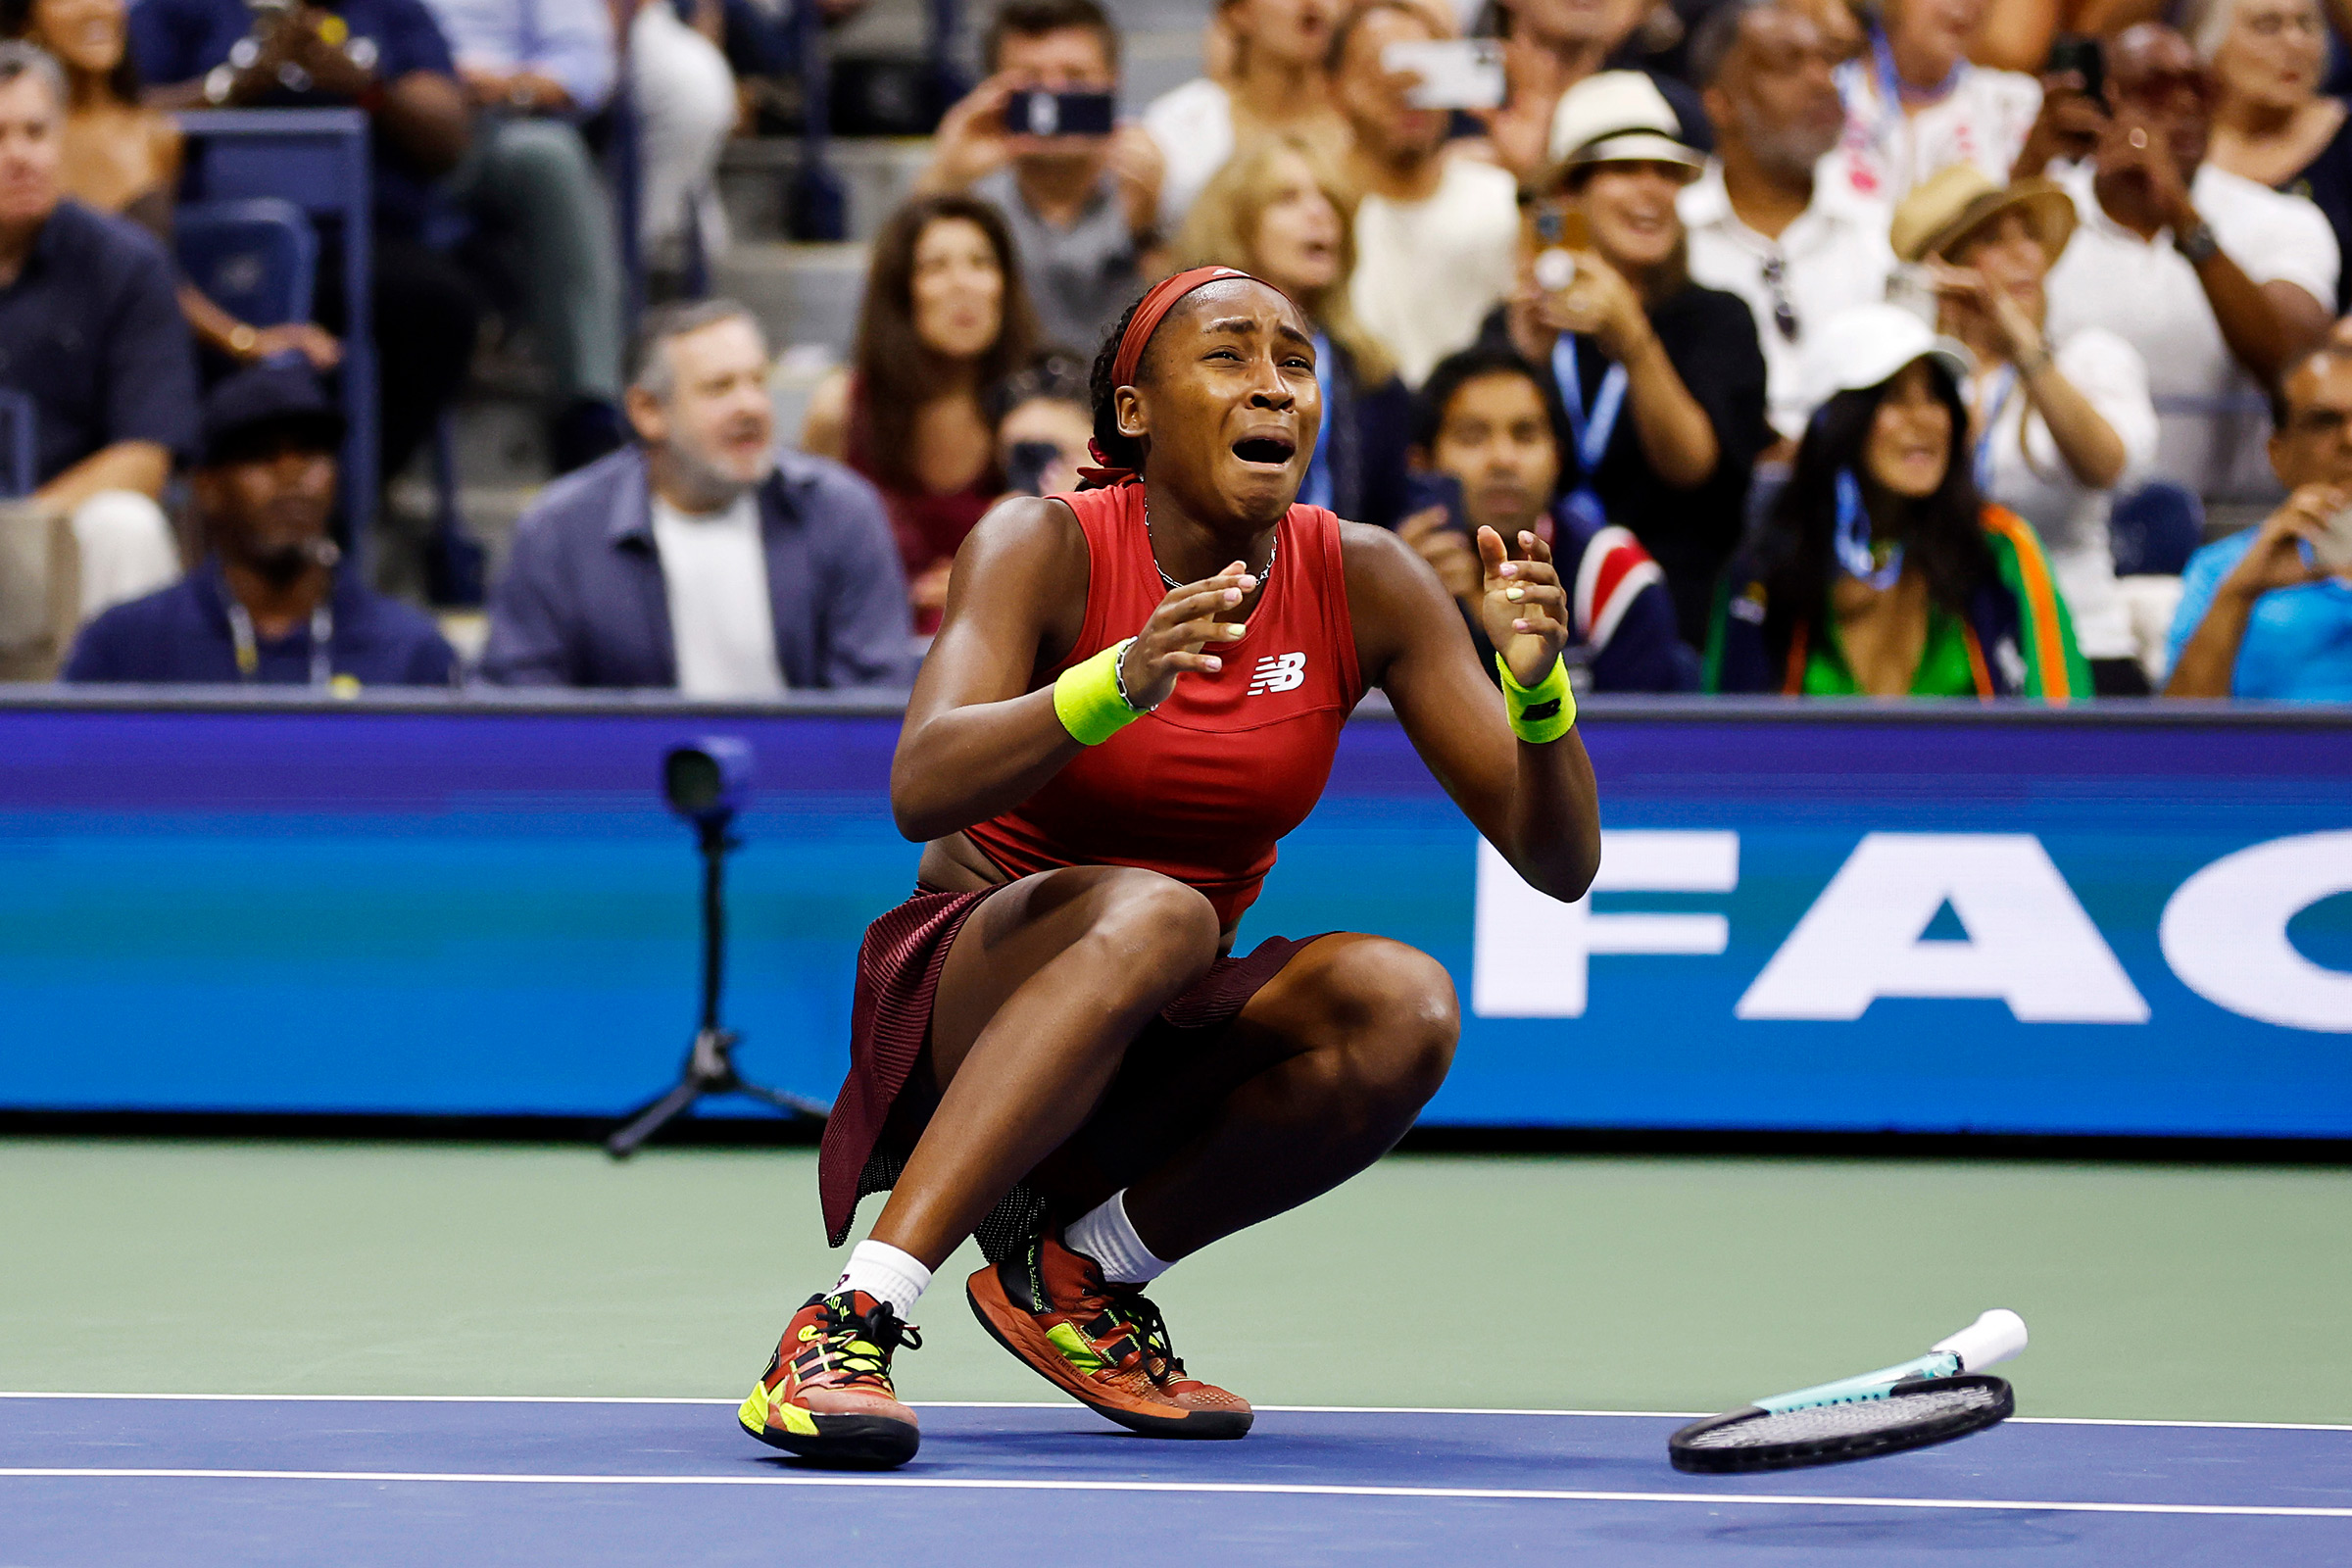 Gauff won what she hopes is the first of many Grand Slams at the 2023 U.S. Open (Sarah Stier—Getty Images)